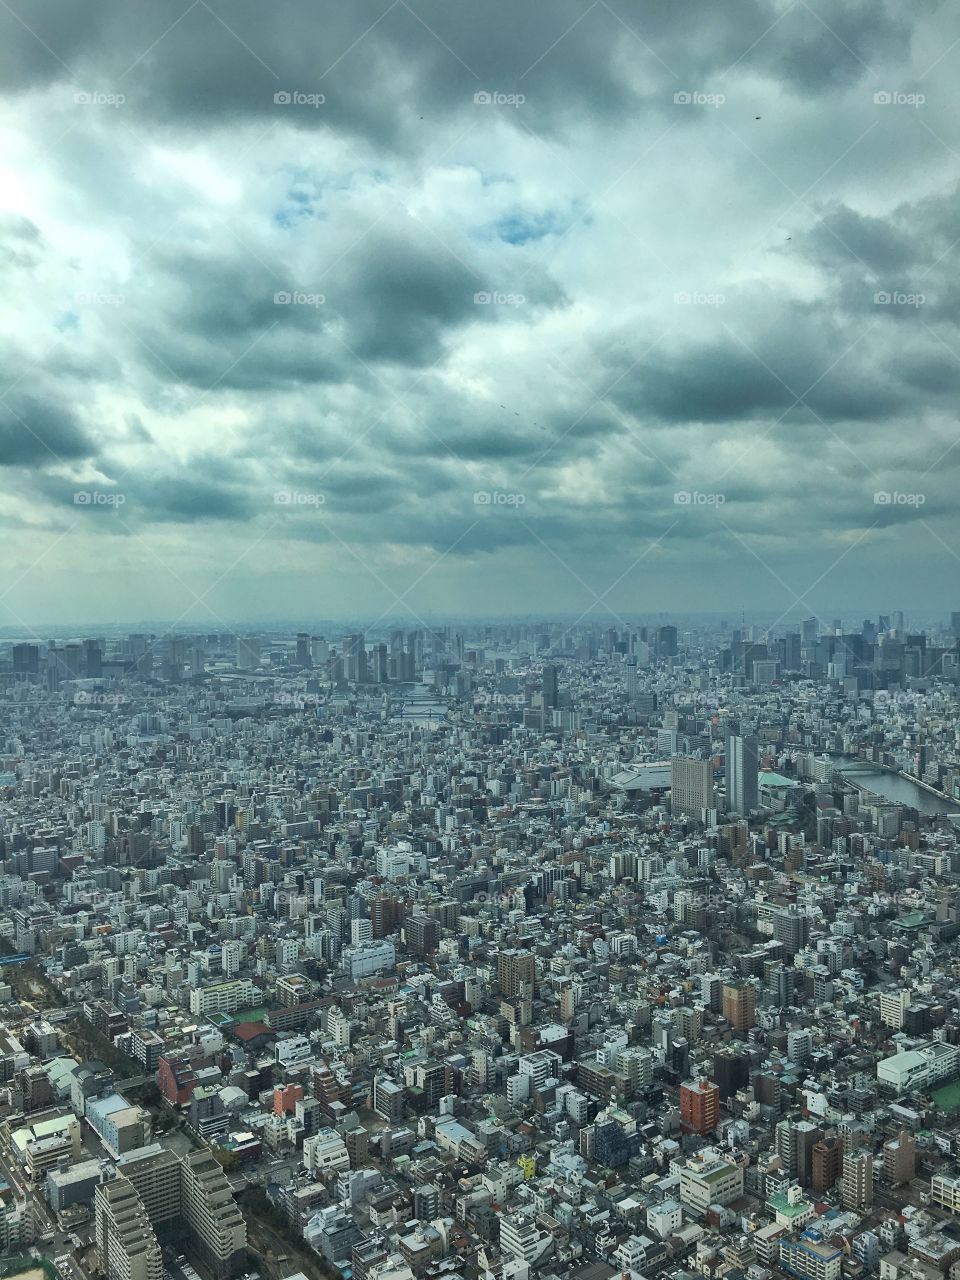 View of Tokyo from the top of the tallest tower in the world, the Tokyo Sky Tree